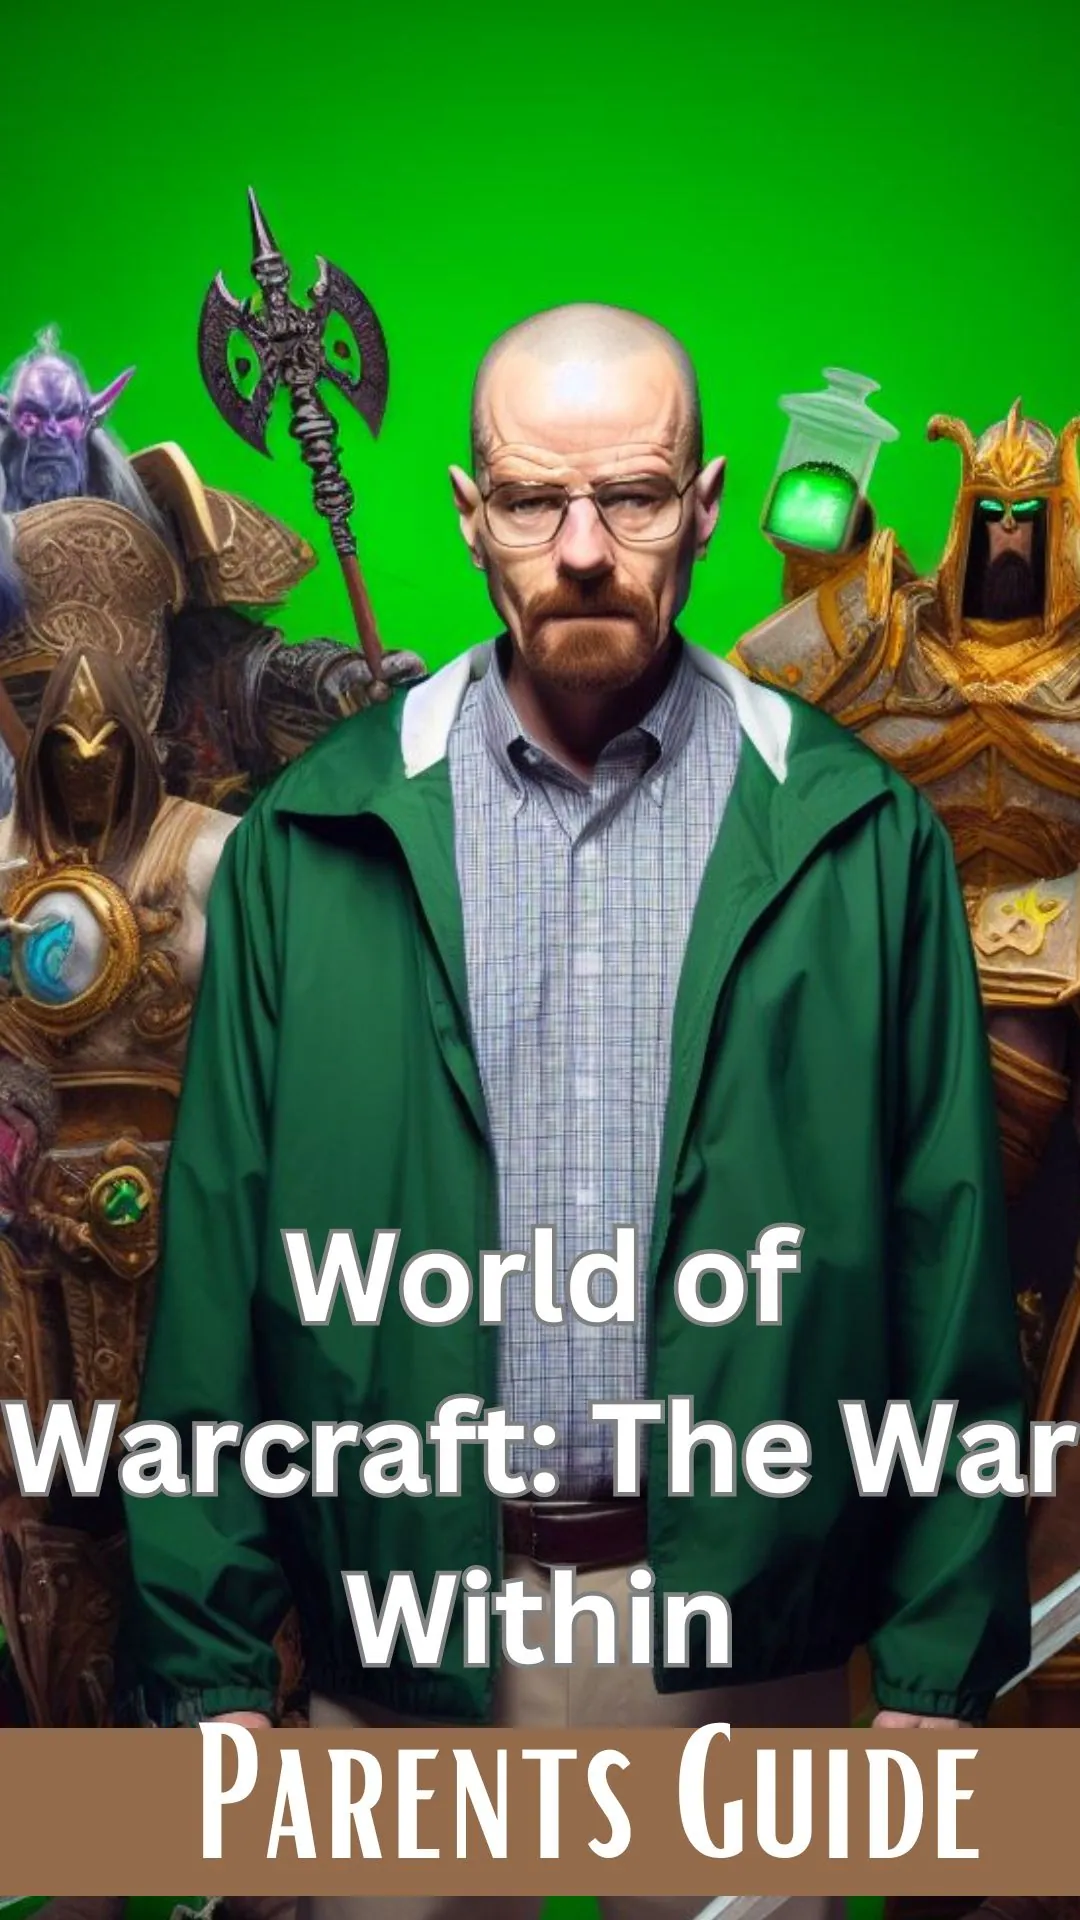 World of Warcraft The War Within Parents Guide (1)